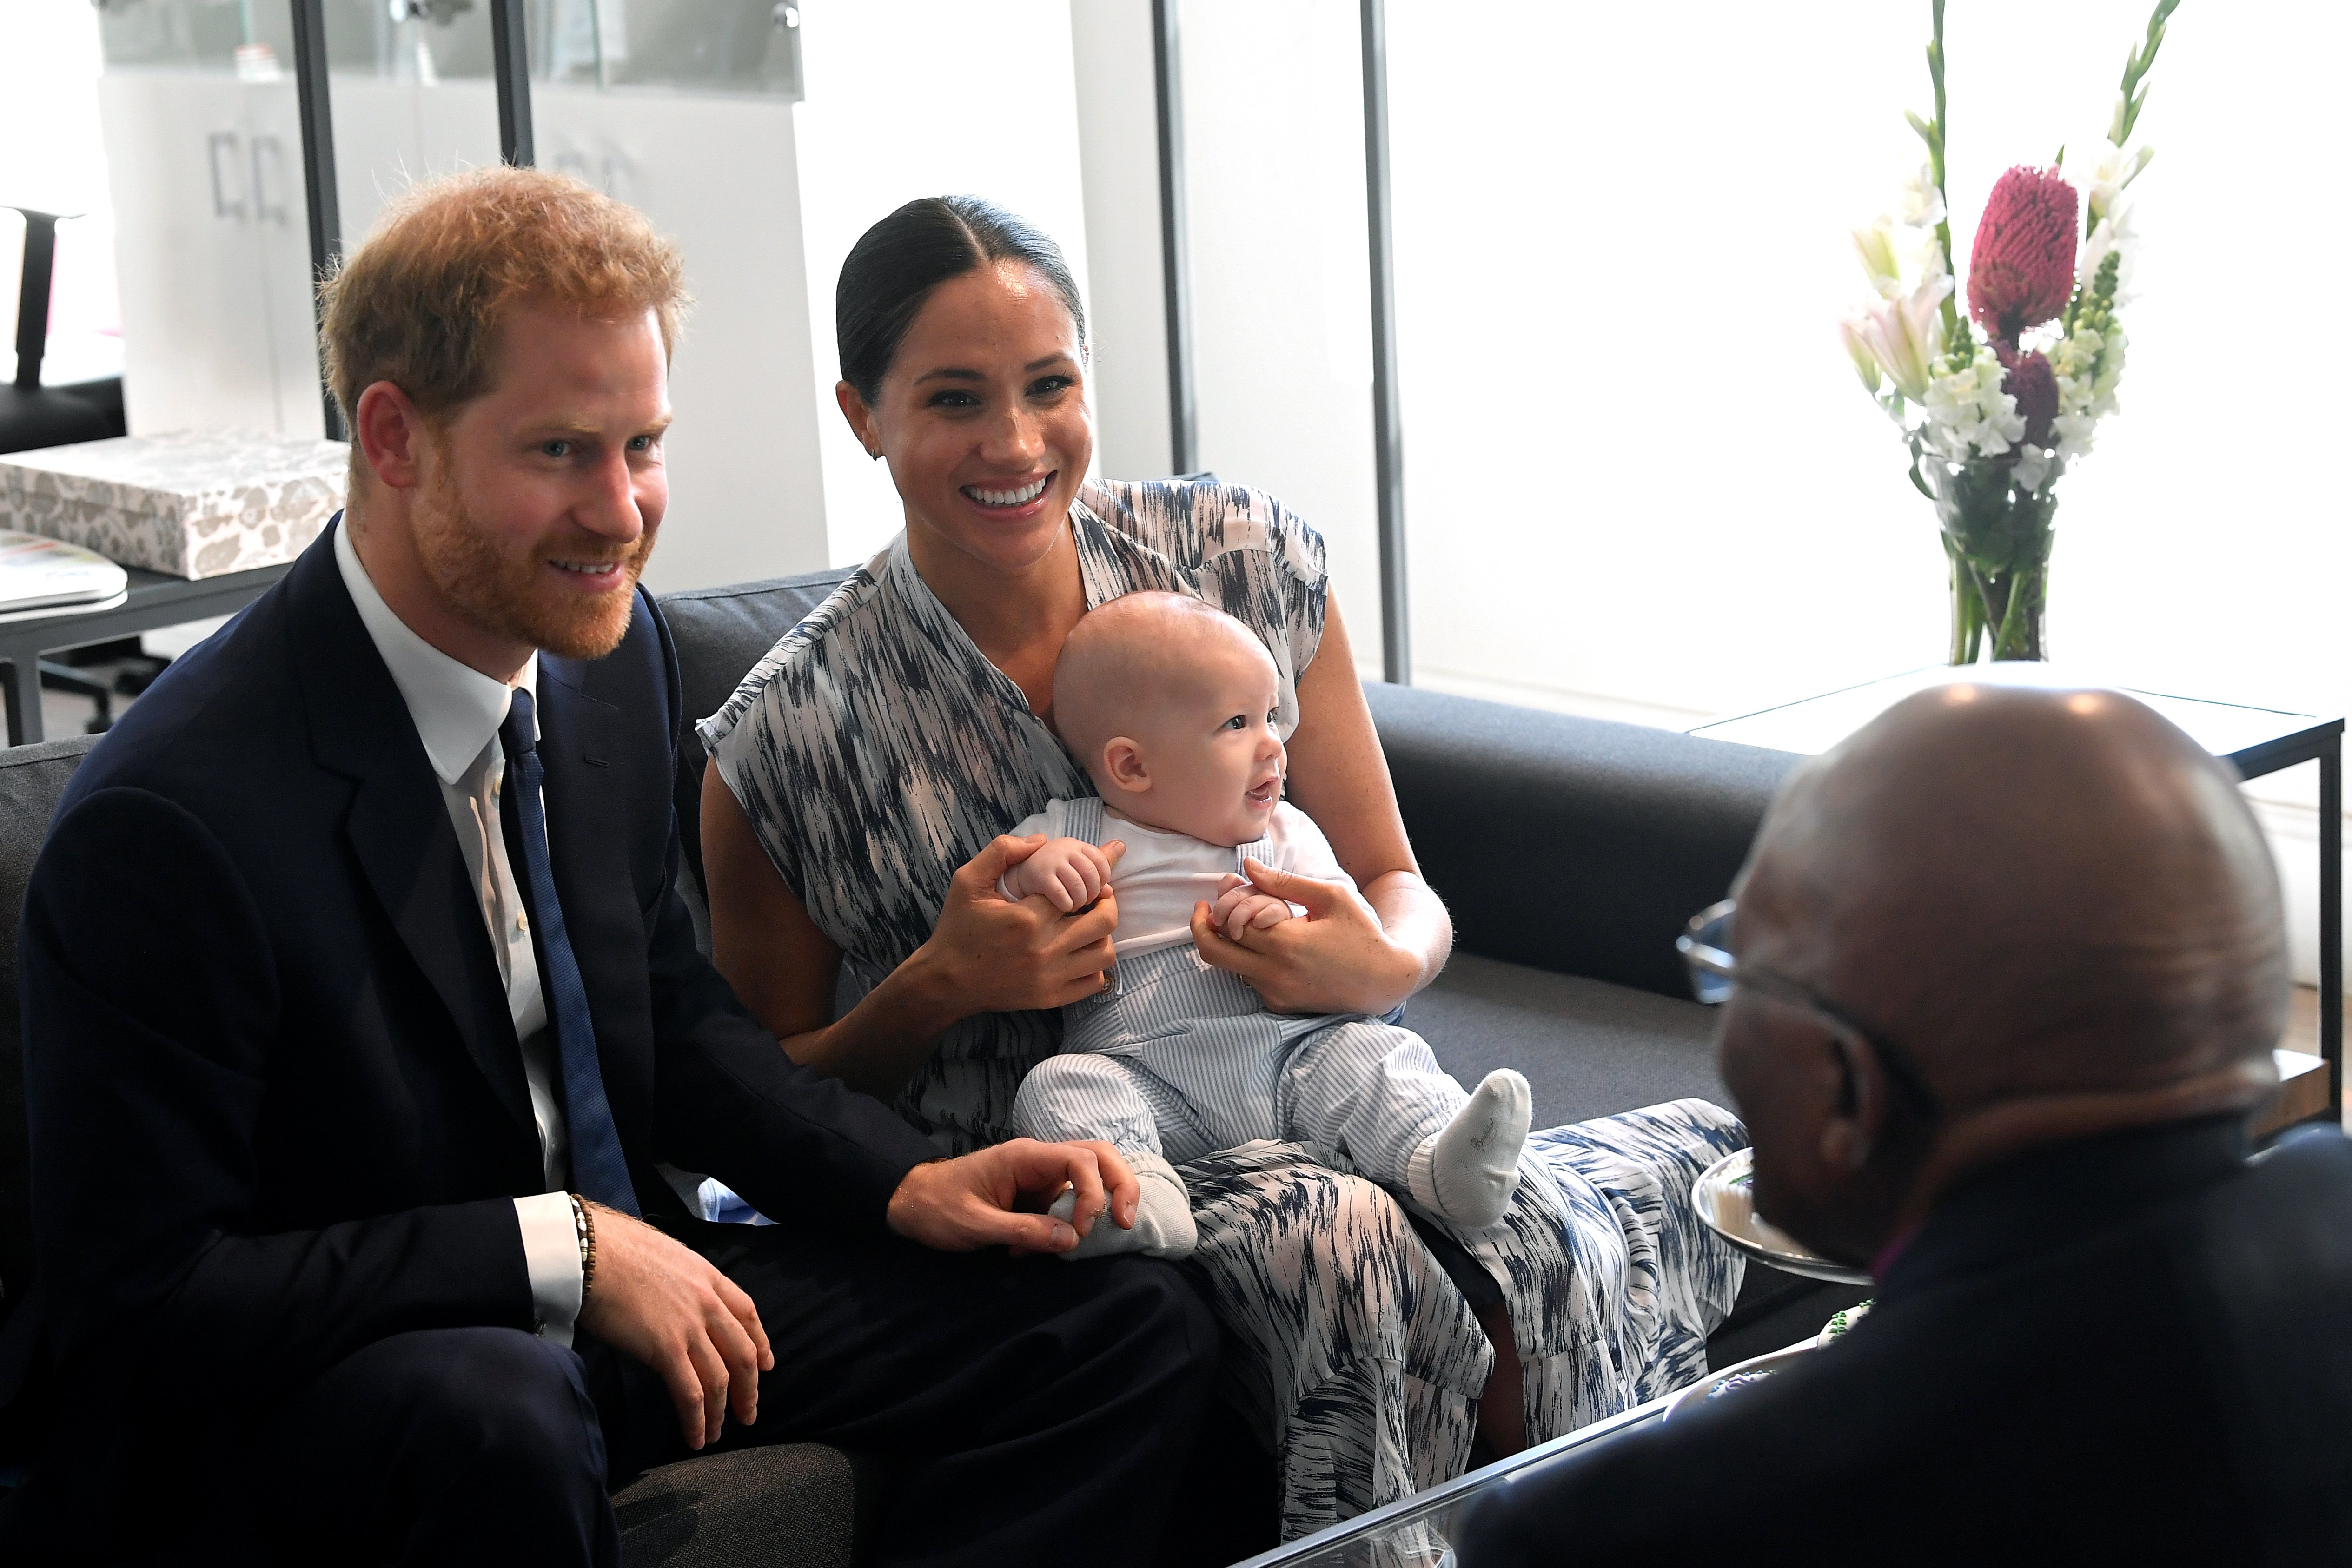 Prince Harry, Meghan Markle, and their baby son Archie meet Archbishop Desmond Tutu during their royal tour of South Africa on September 25, 2019 | Photo: GettyImages